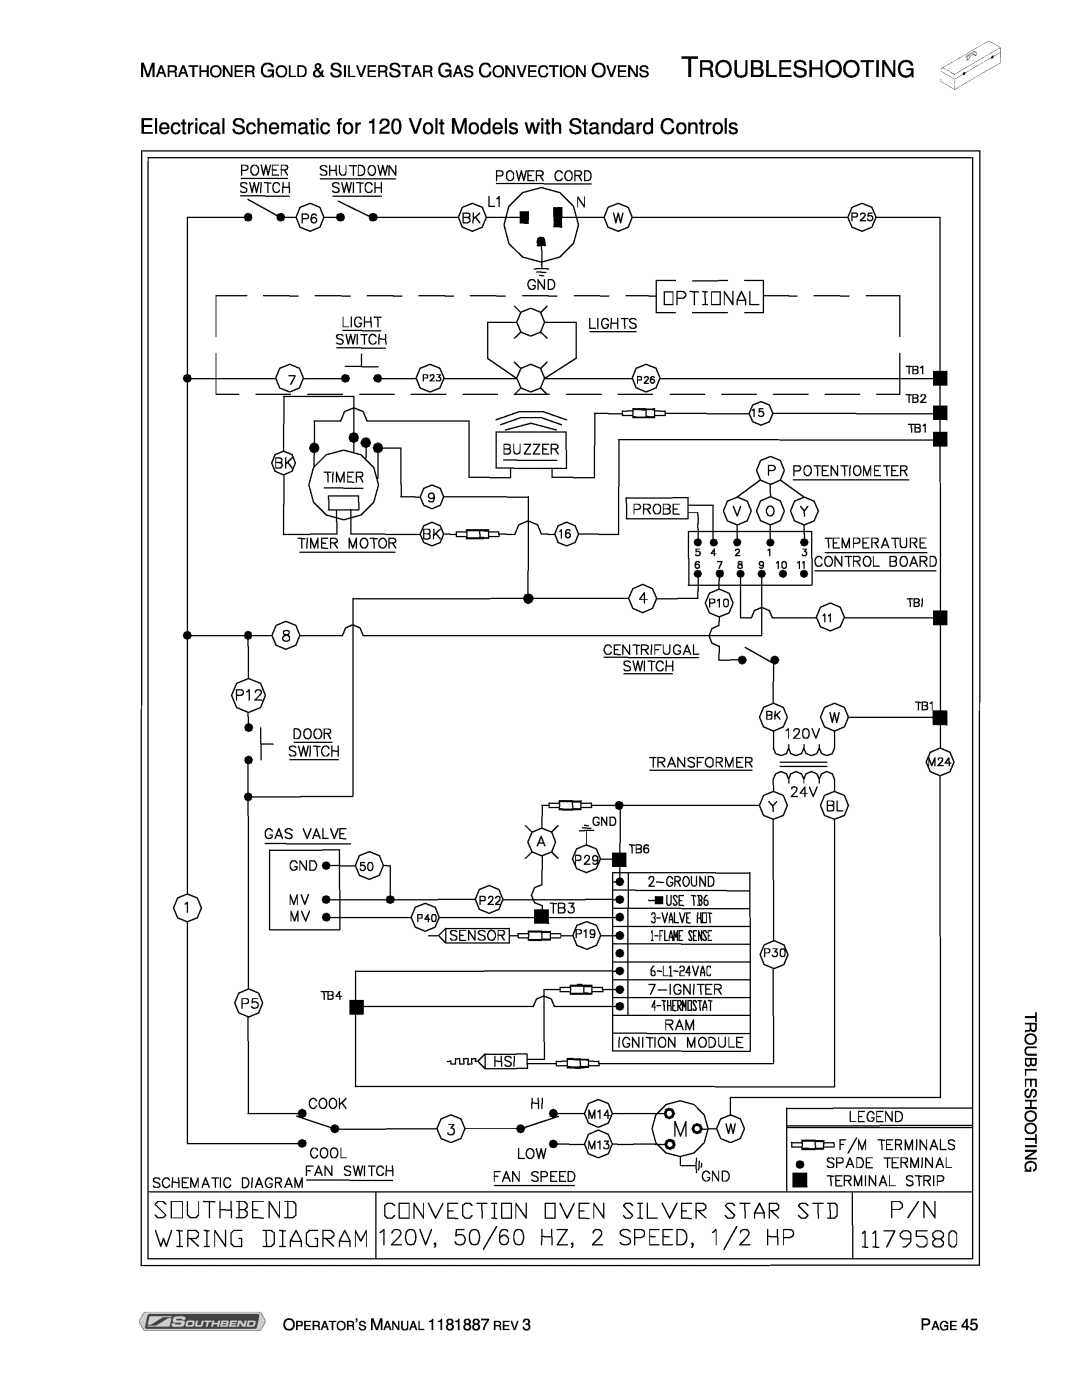 Southbend Marathoner manual Electrical Schematic for 120 Volt Models with Standard Controls, Troubleshooting 